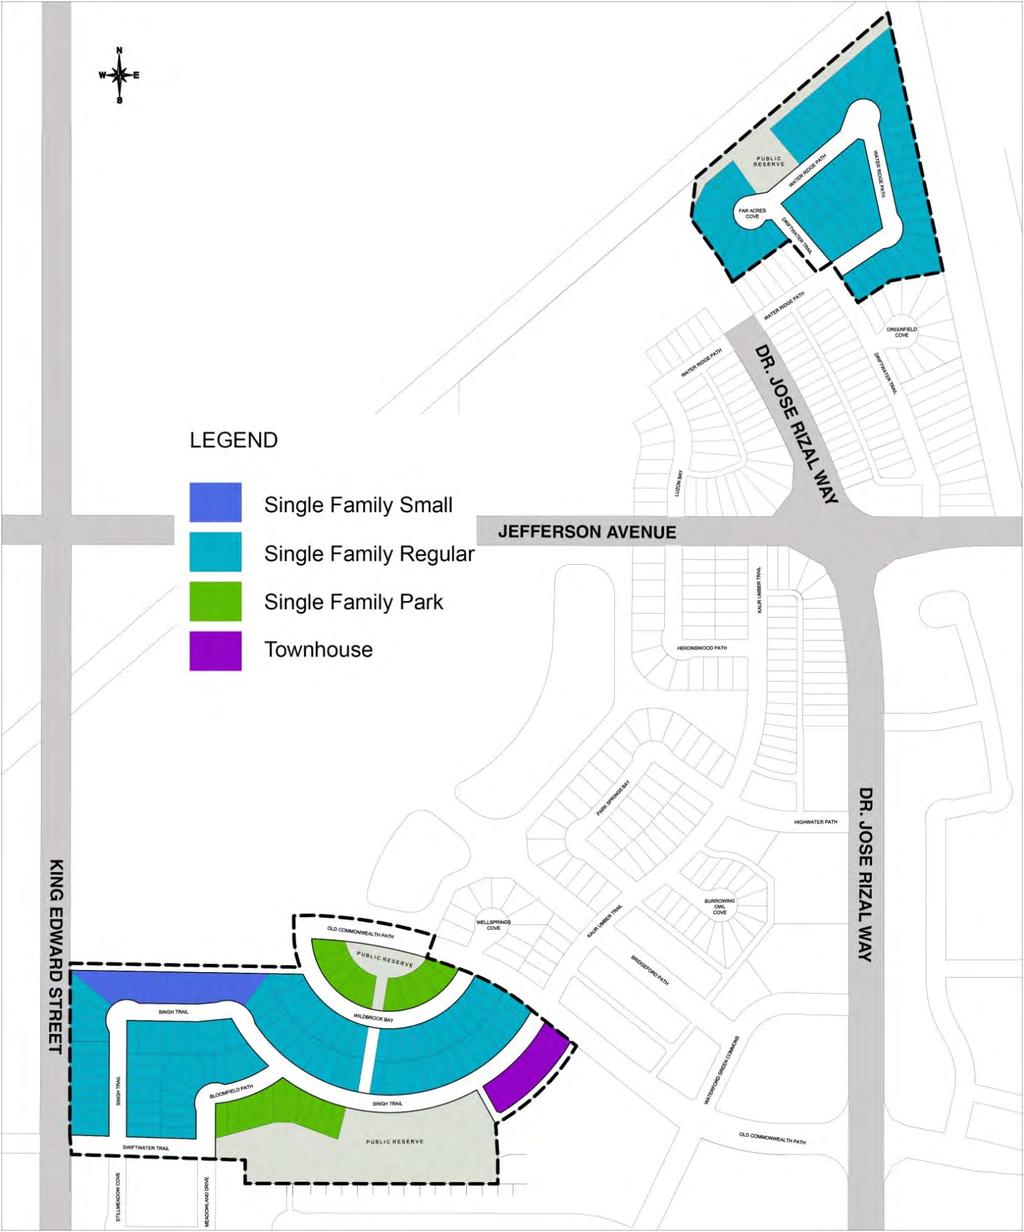 MAP 2 PHASE 2 LAYOUT PLAN 15 Waterford Green Phase 2 - Architectural